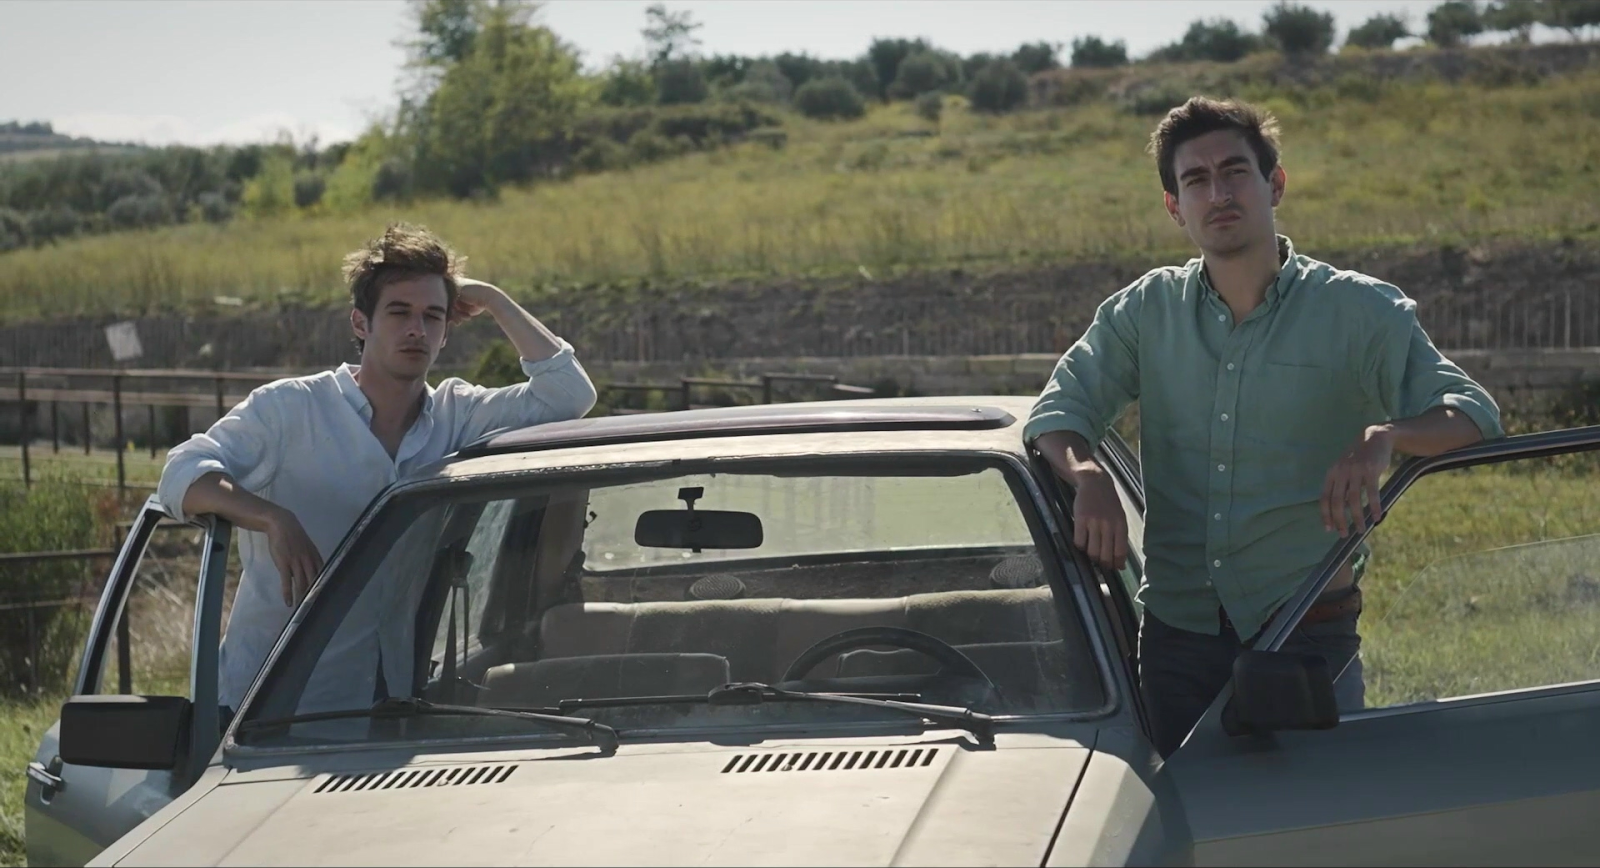 A still from The Man with the Answers, Vasilis Magouliotis as Victoras and Anton Weil as Mathias standing outside a car together. 